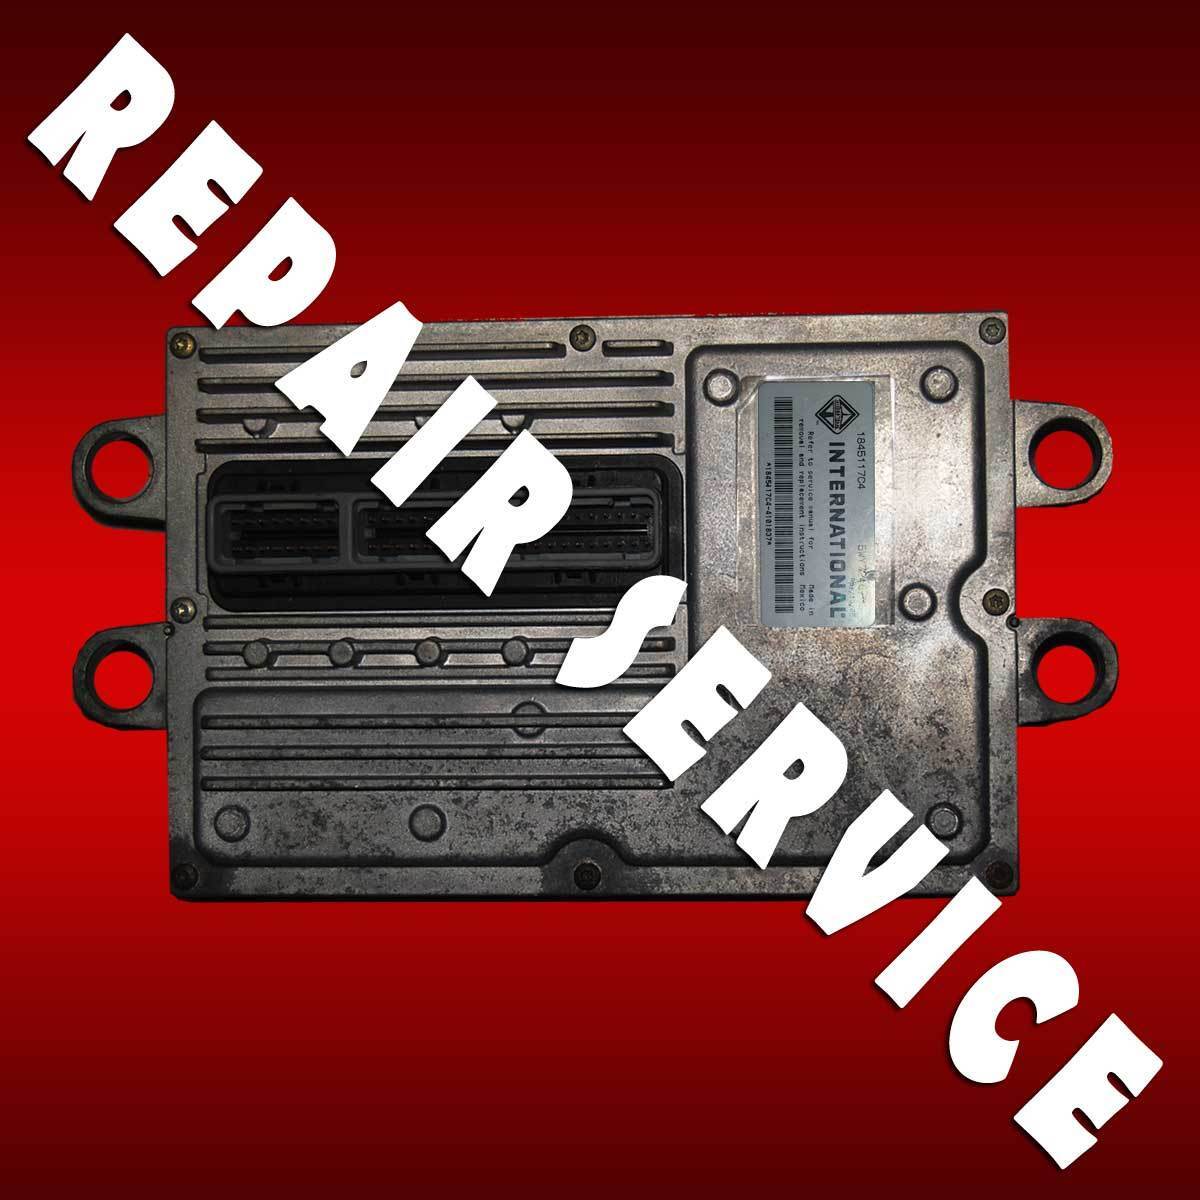 03 04 05 06 07 08 FORD 6.0 DIESEL FICM REPAIR SERVICE upgrade to 58 volt output